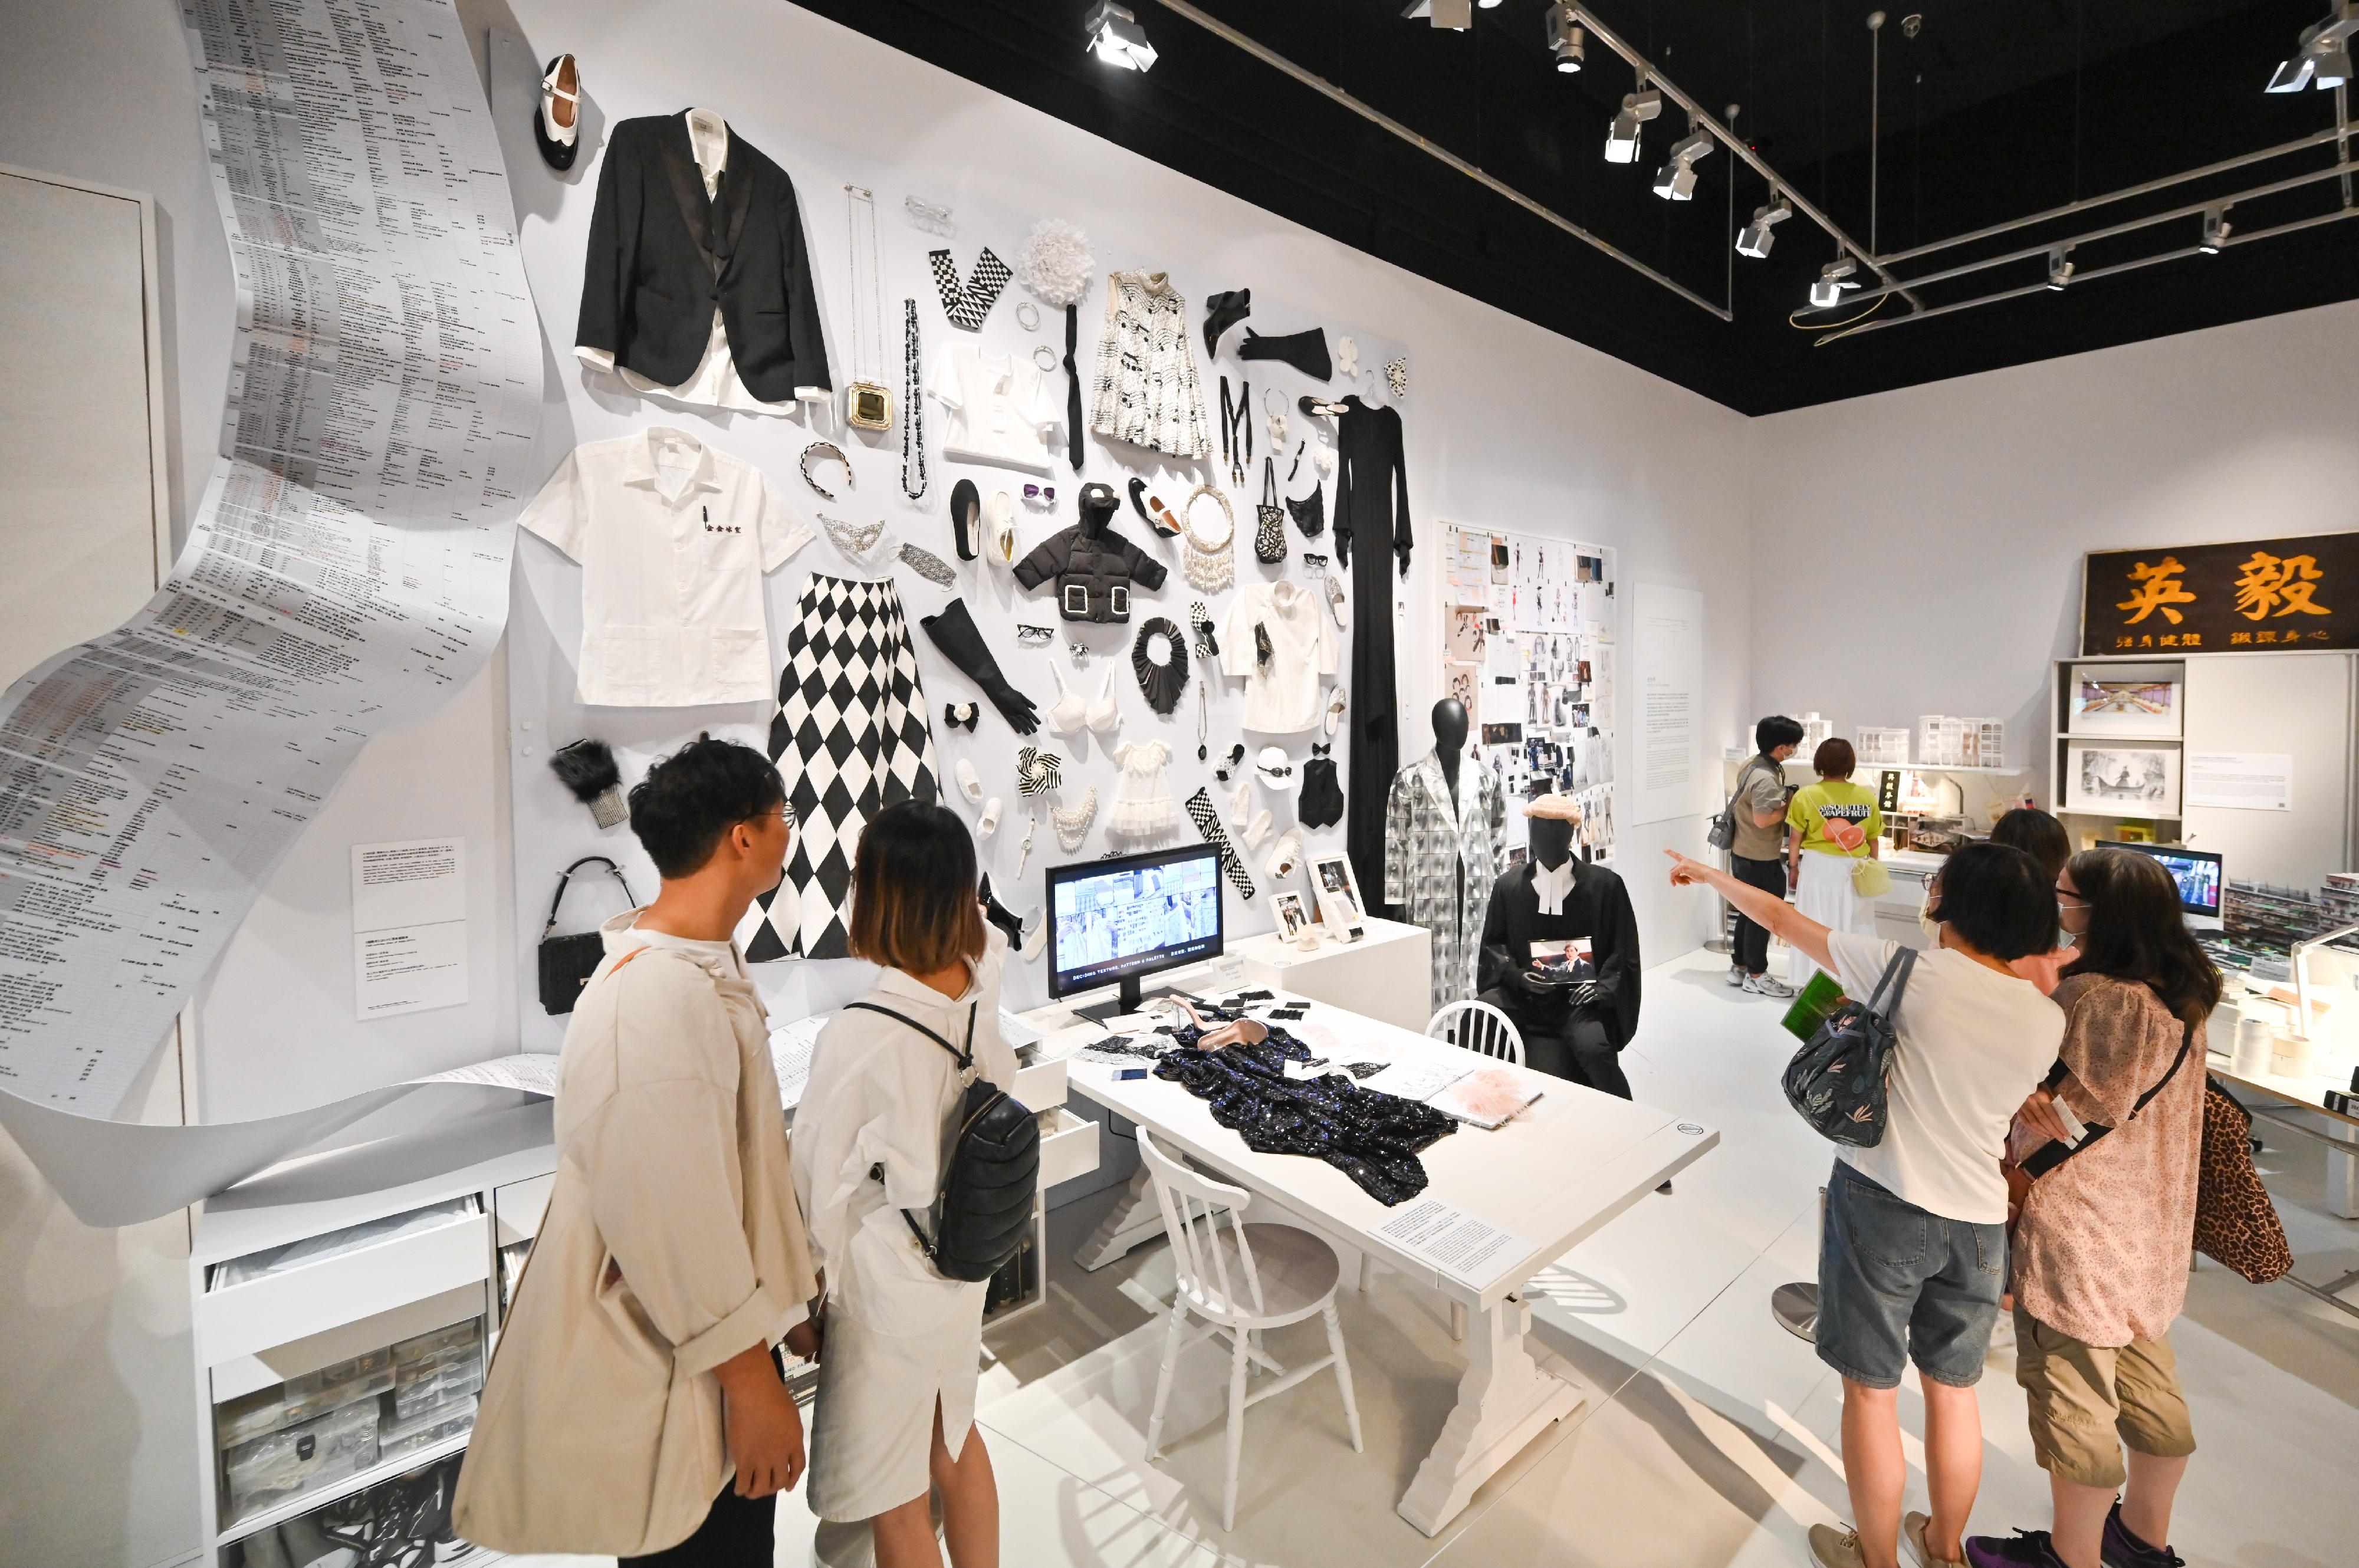 To tie in with the first Hong Kong Pop Culture Festival, presented by the Leisure and Cultural Services Department, the Hong Kong Heritage Museum is currently staging the "Out of Thin Air: Hong Kong Film Arts & Costumes Exhibition". Photo shows visitors inside the exhibition.